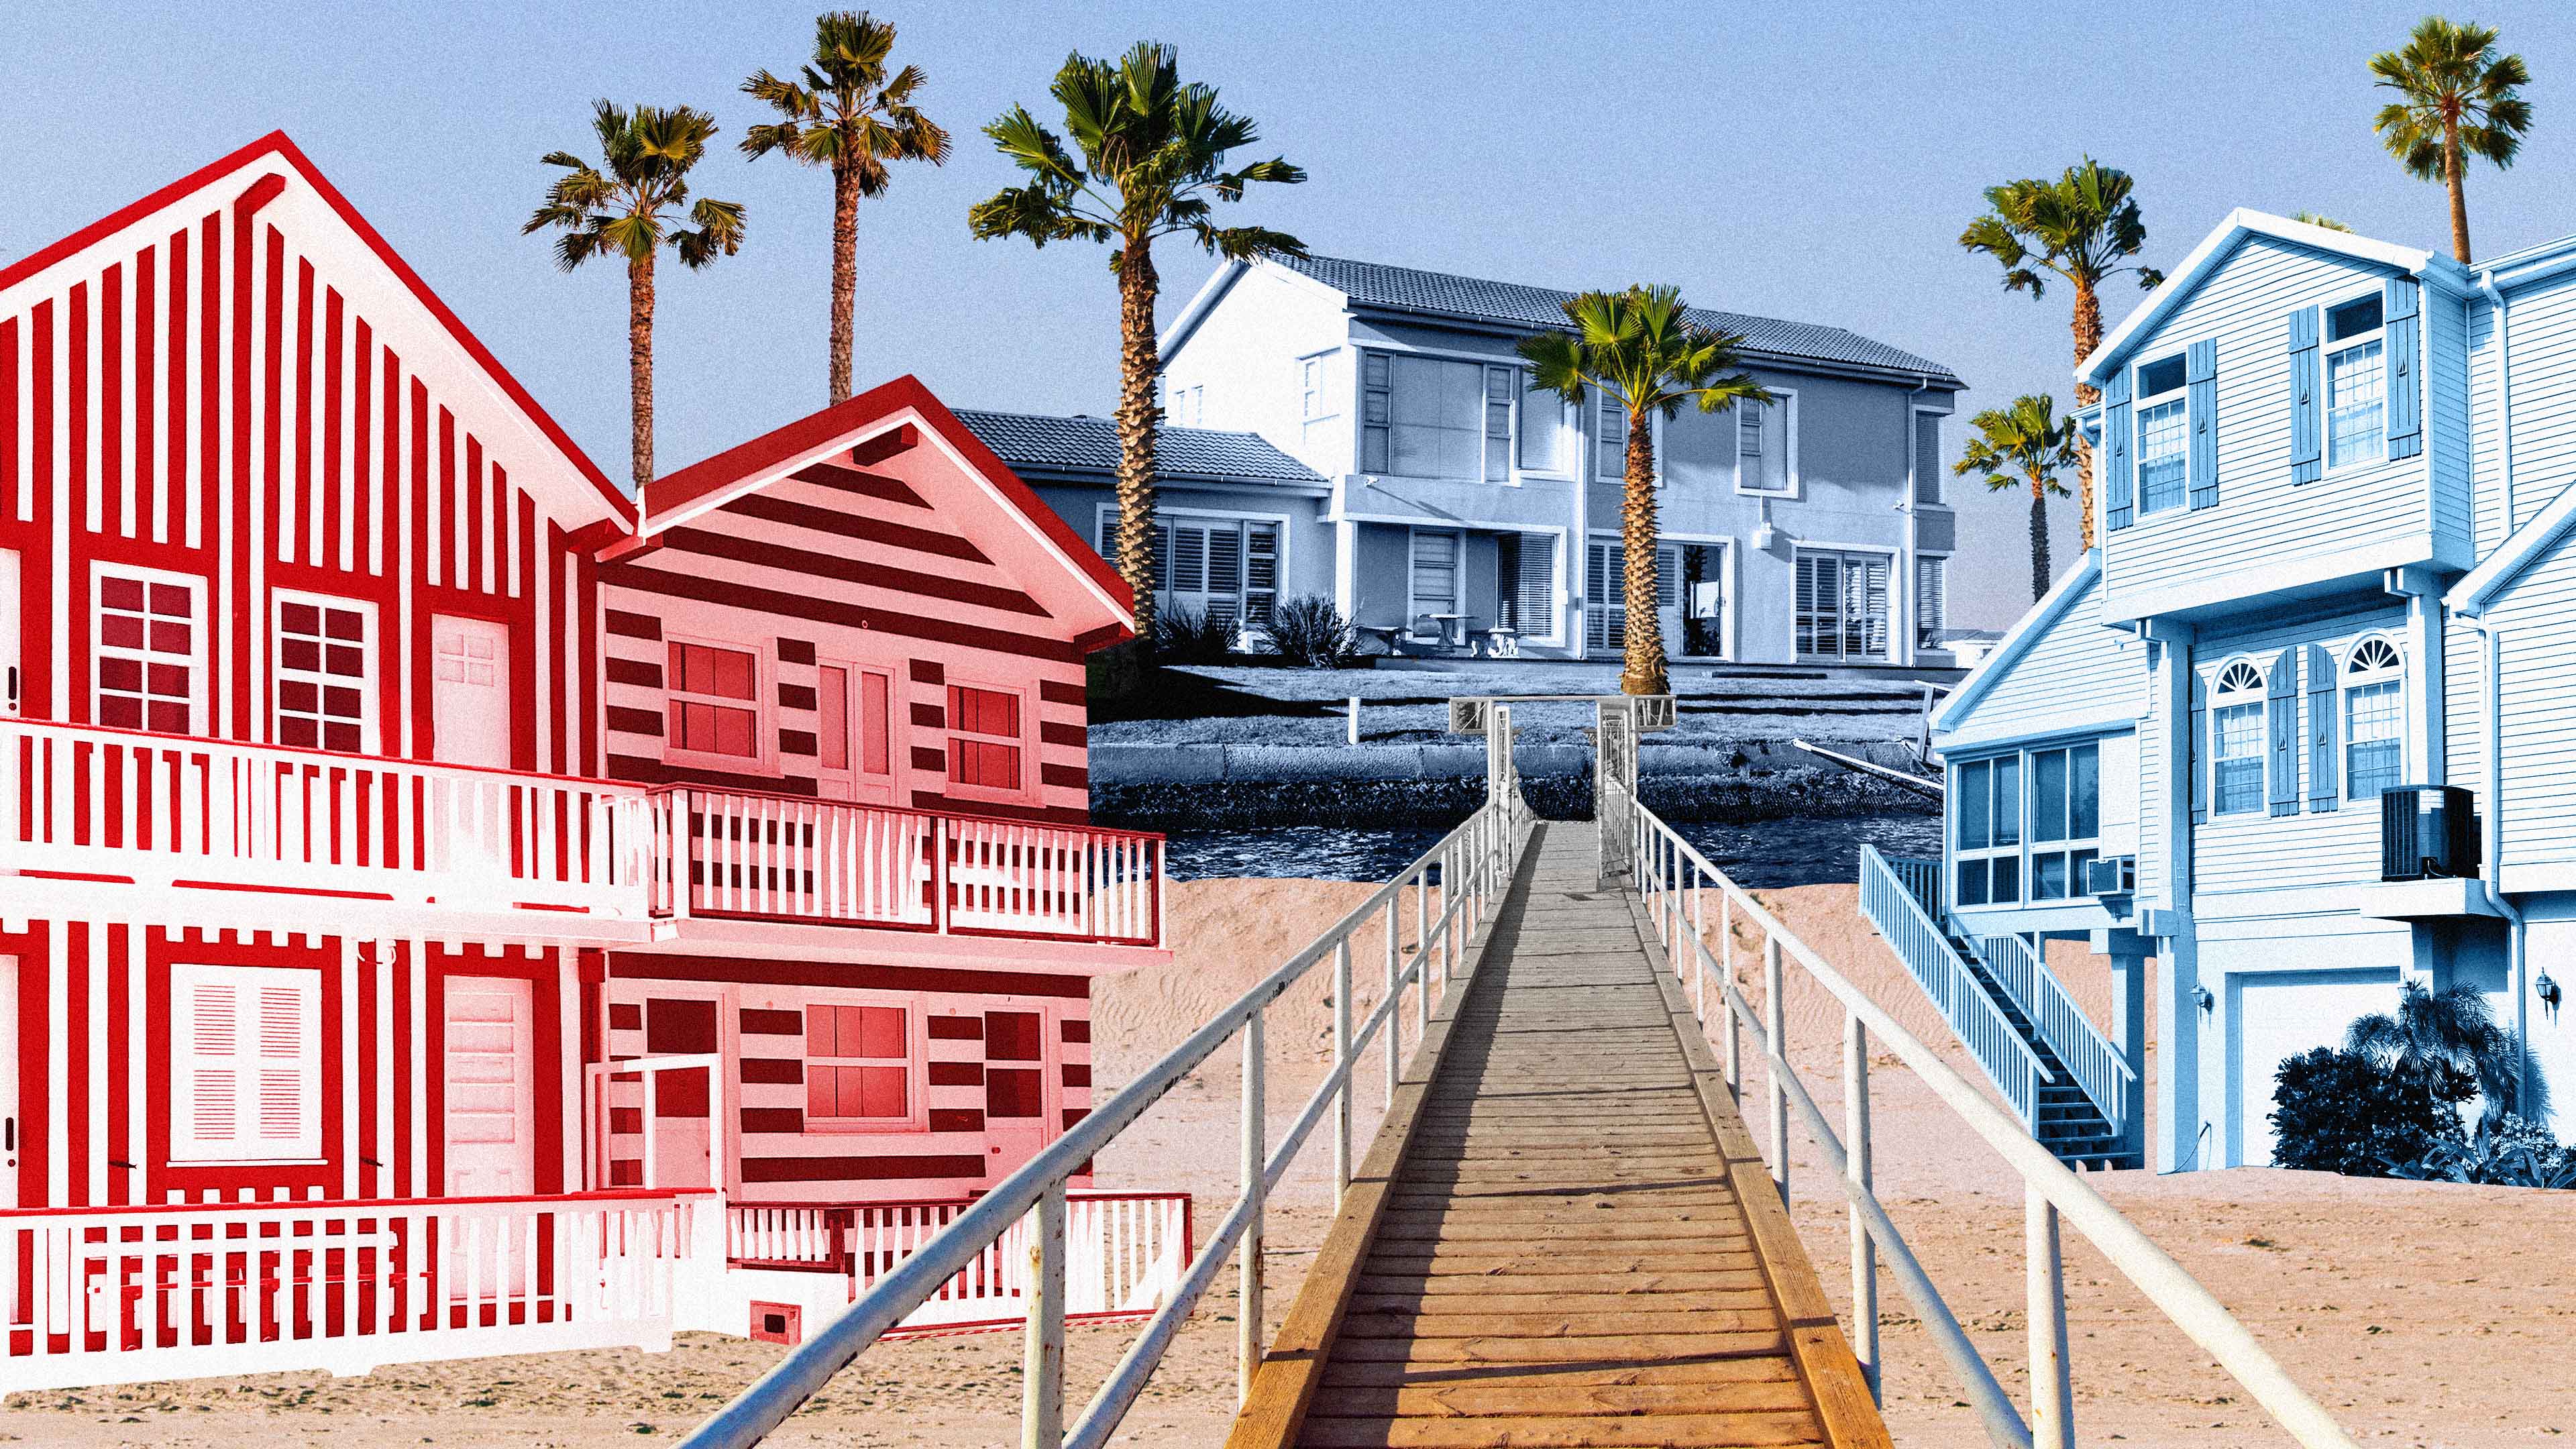 Collage of holiday homes on beach